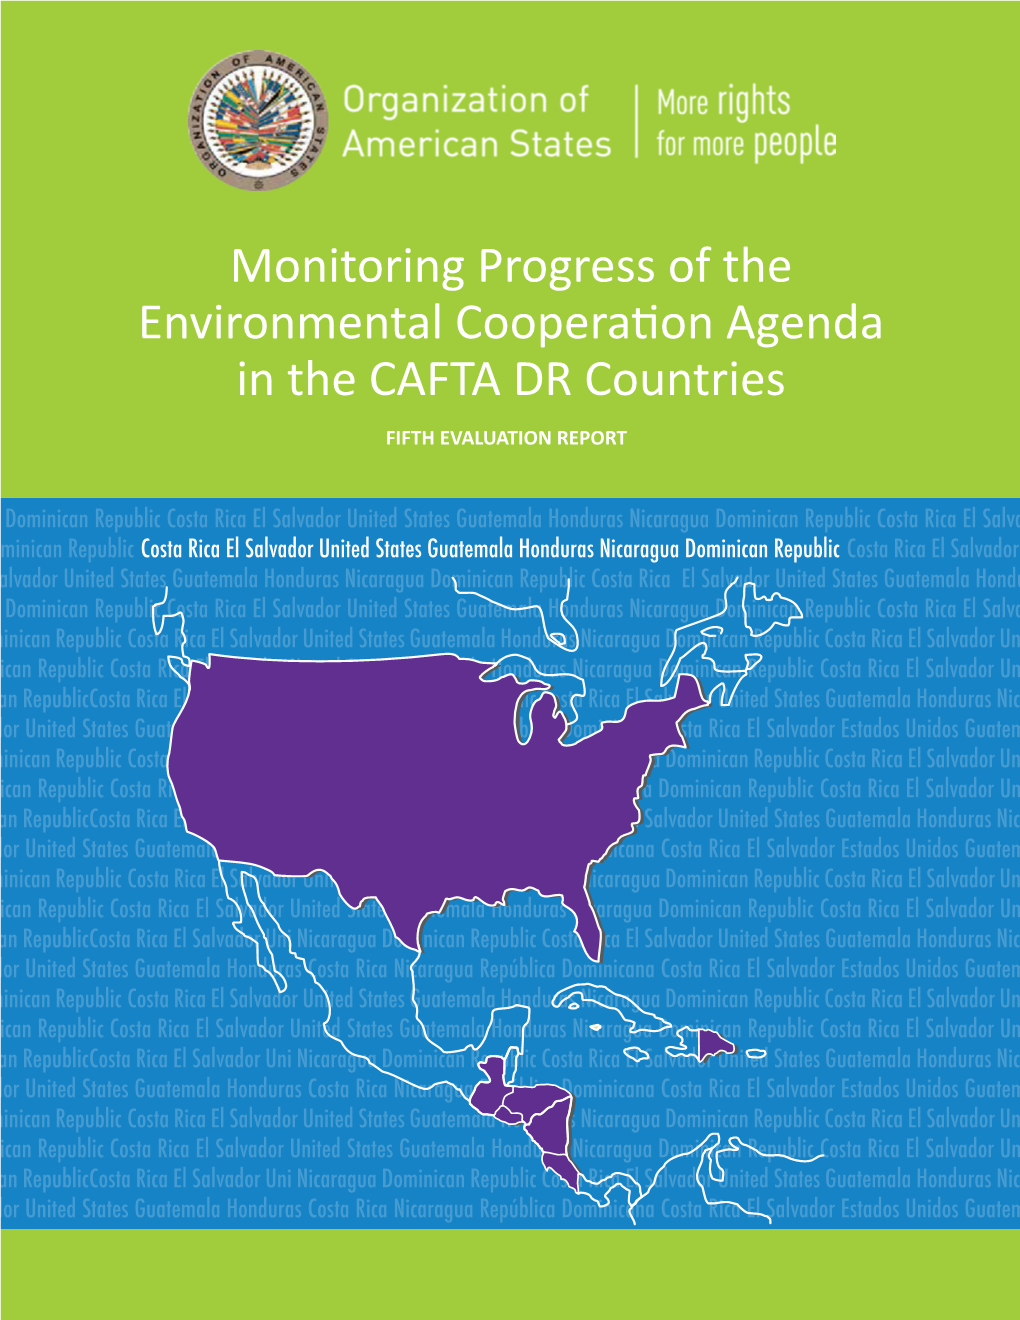 Monitoring Progress of the Environmental Cooperation Agenda in CAFTA-DR Countries – Fifth Evaluation Report